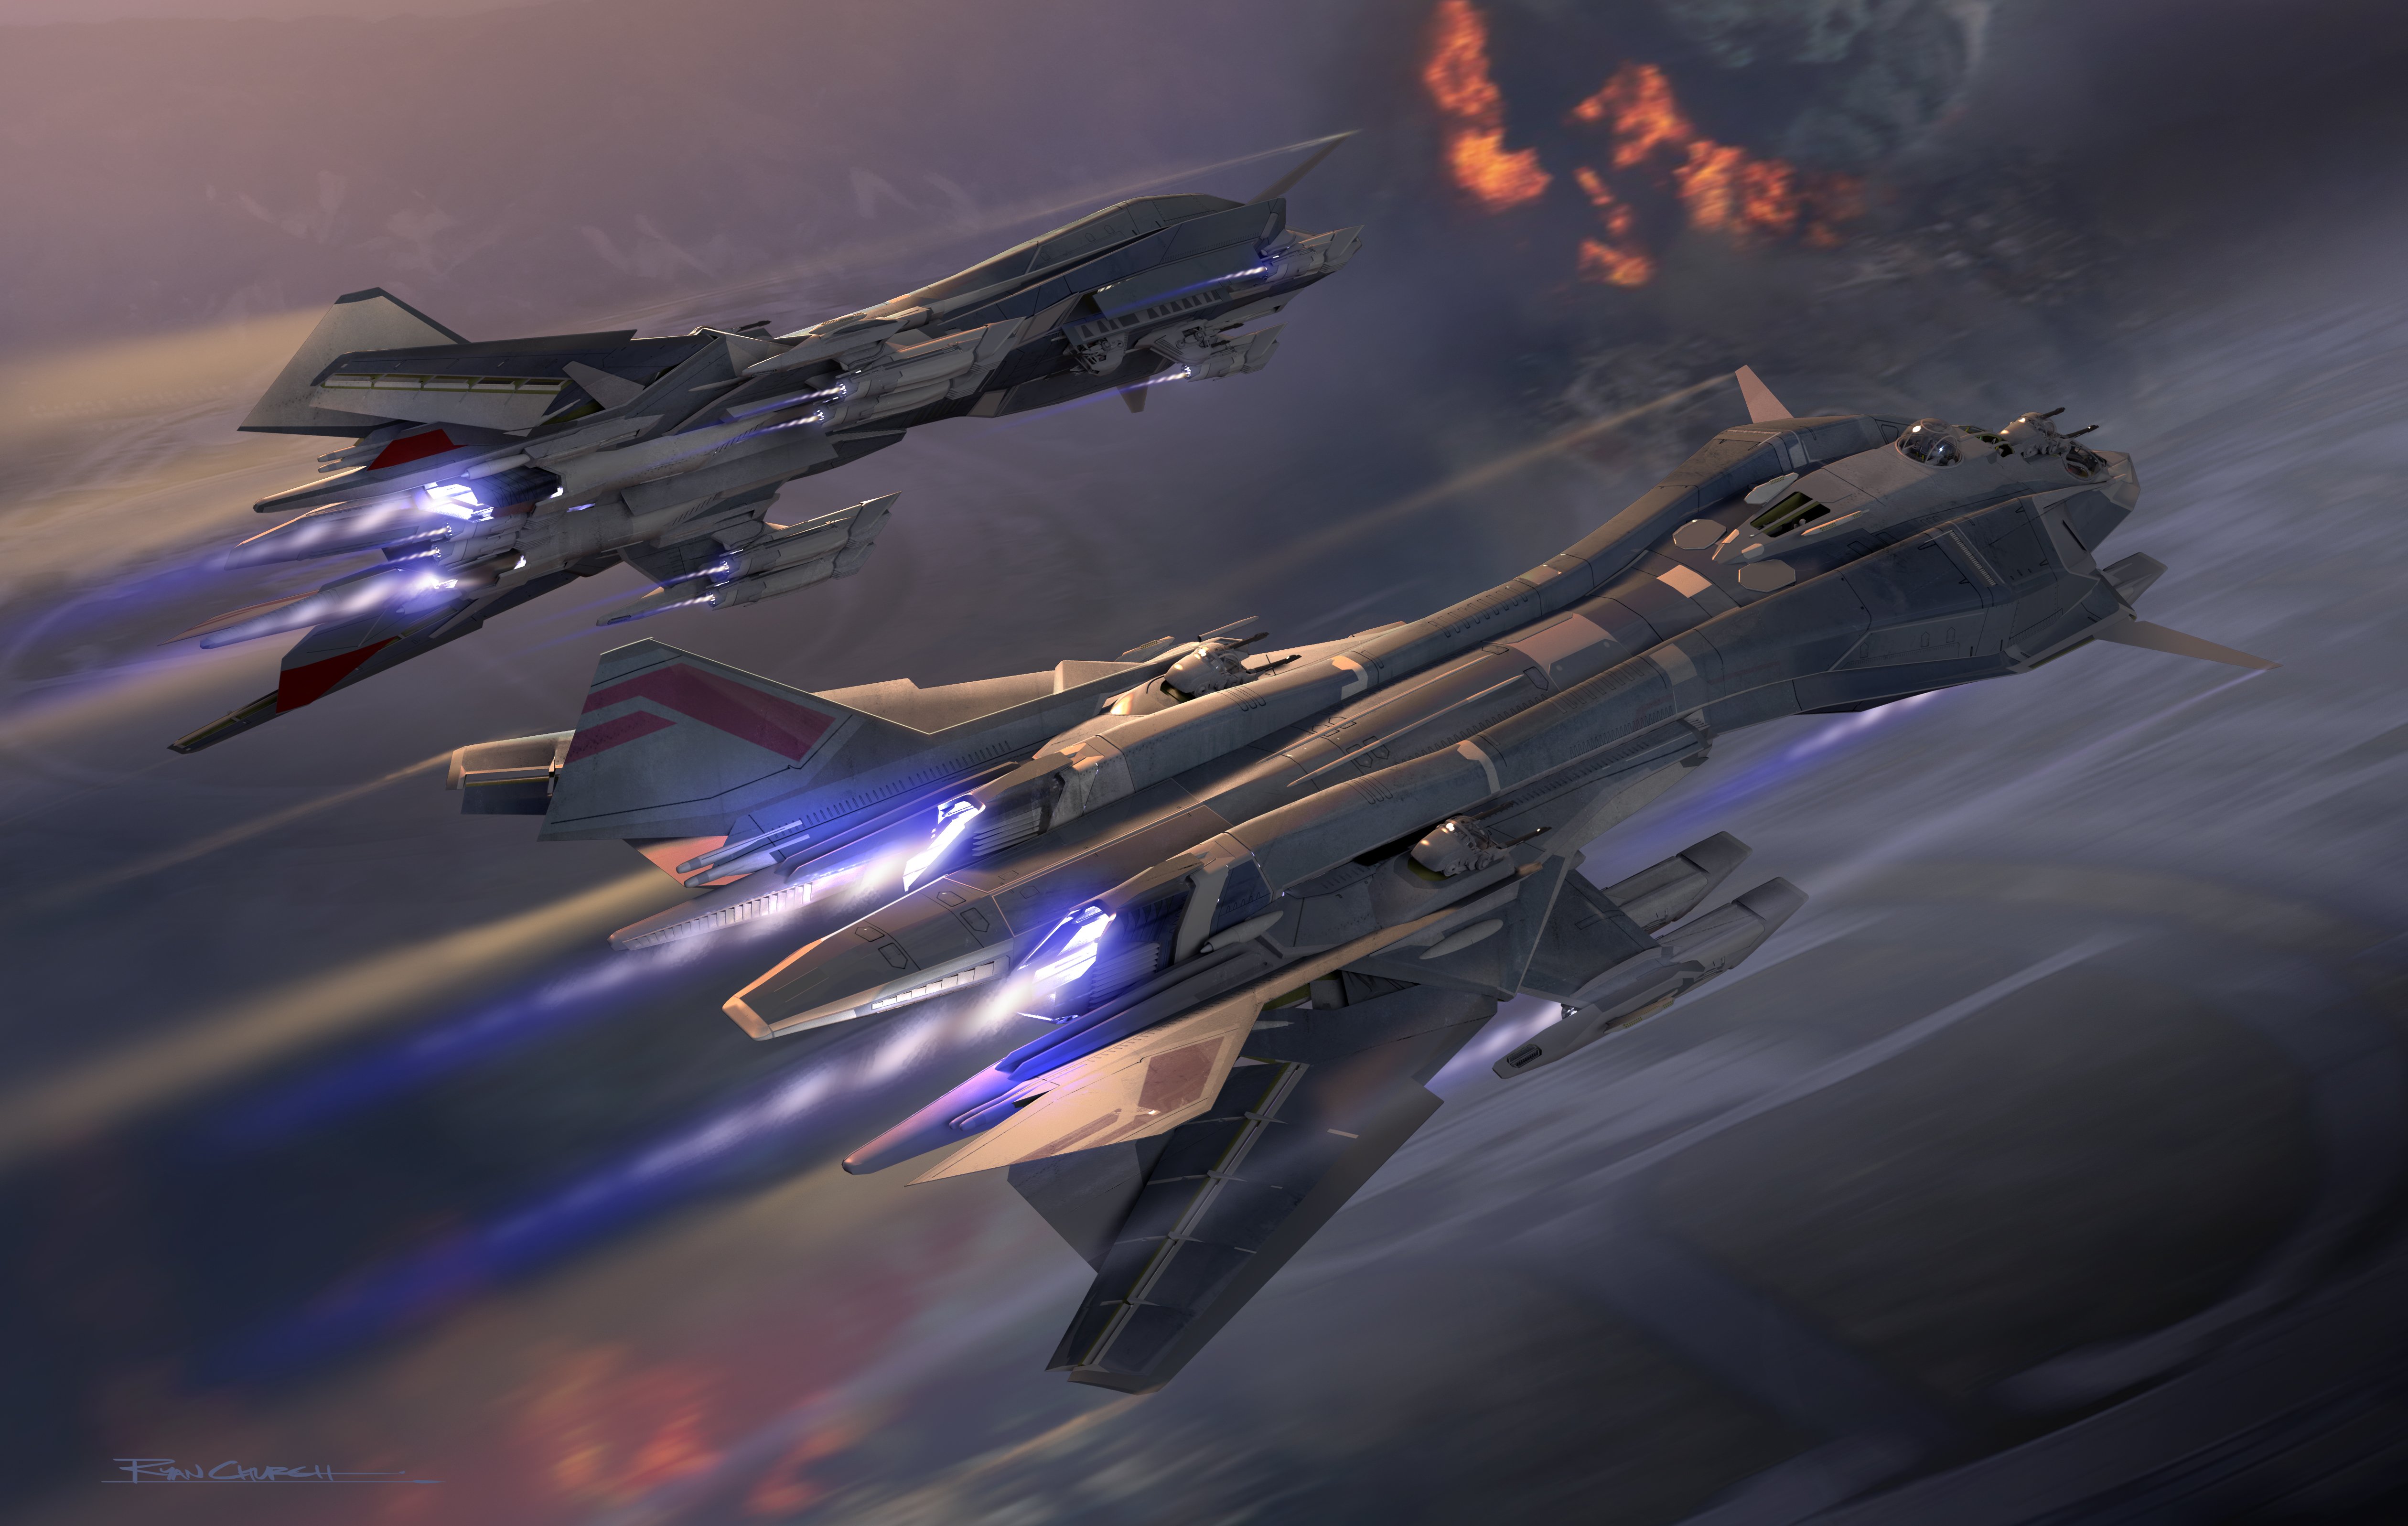 spaceships, Space, Aircrafts Wallpaper